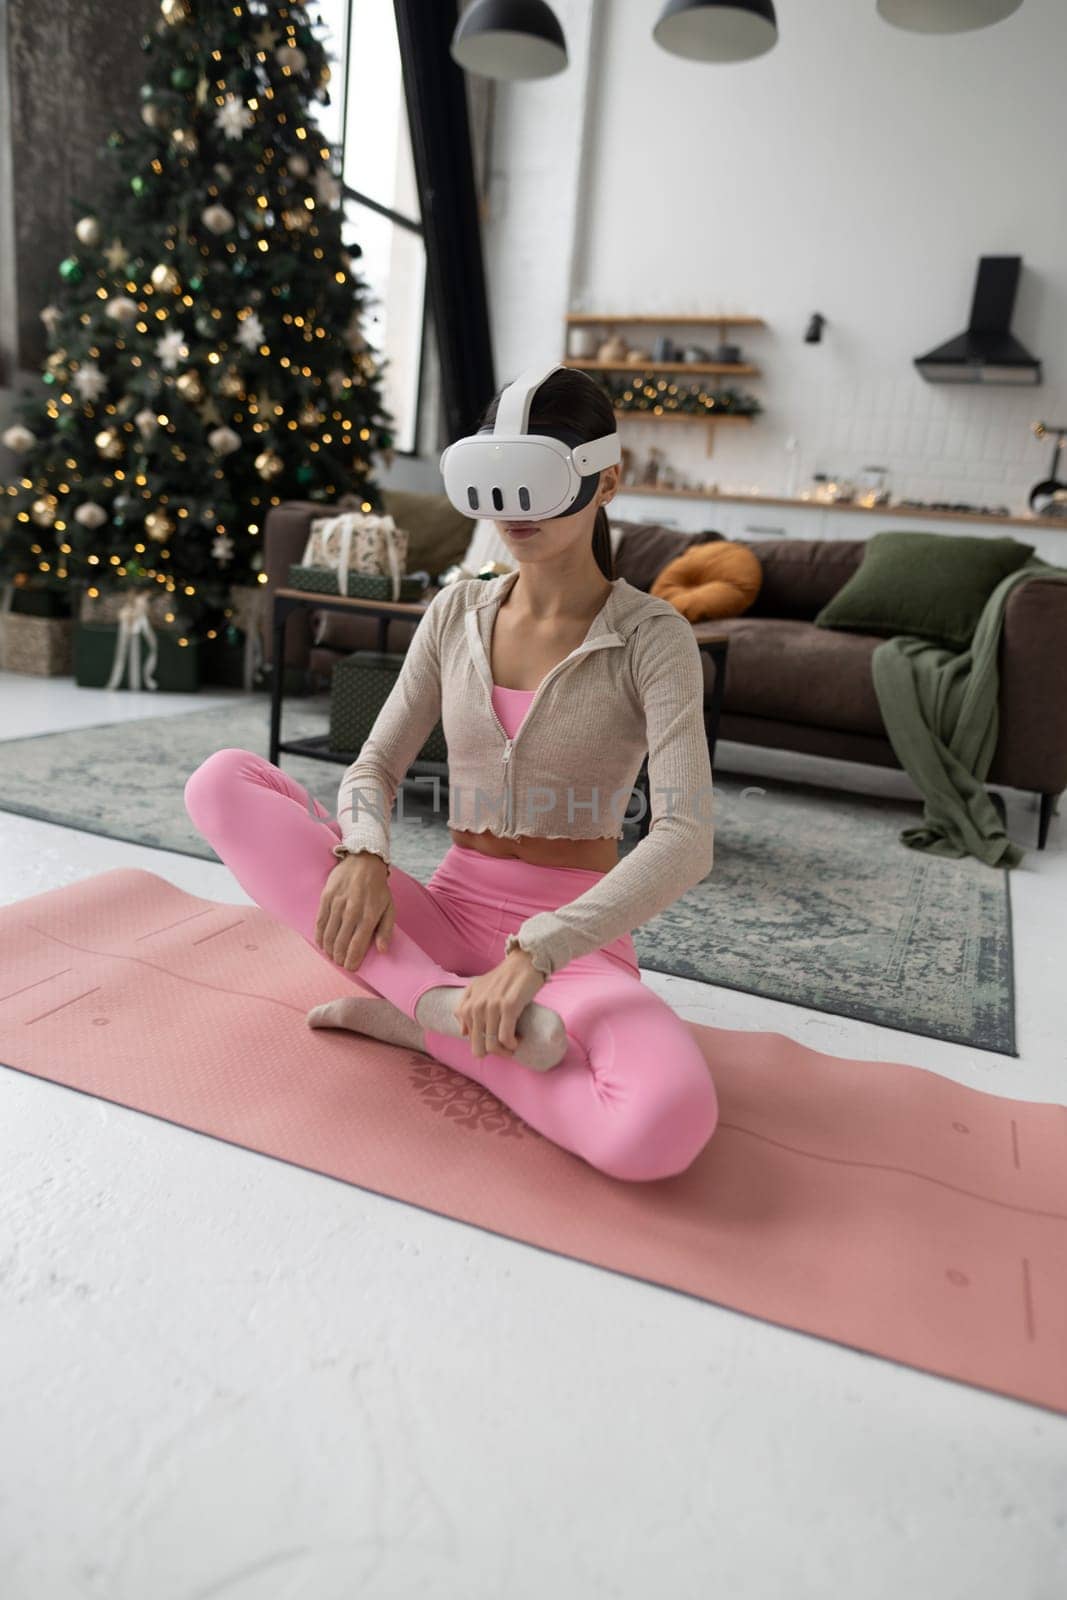 In pink workout attire, a woman engages in yoga while wearing VR goggles. High quality photo